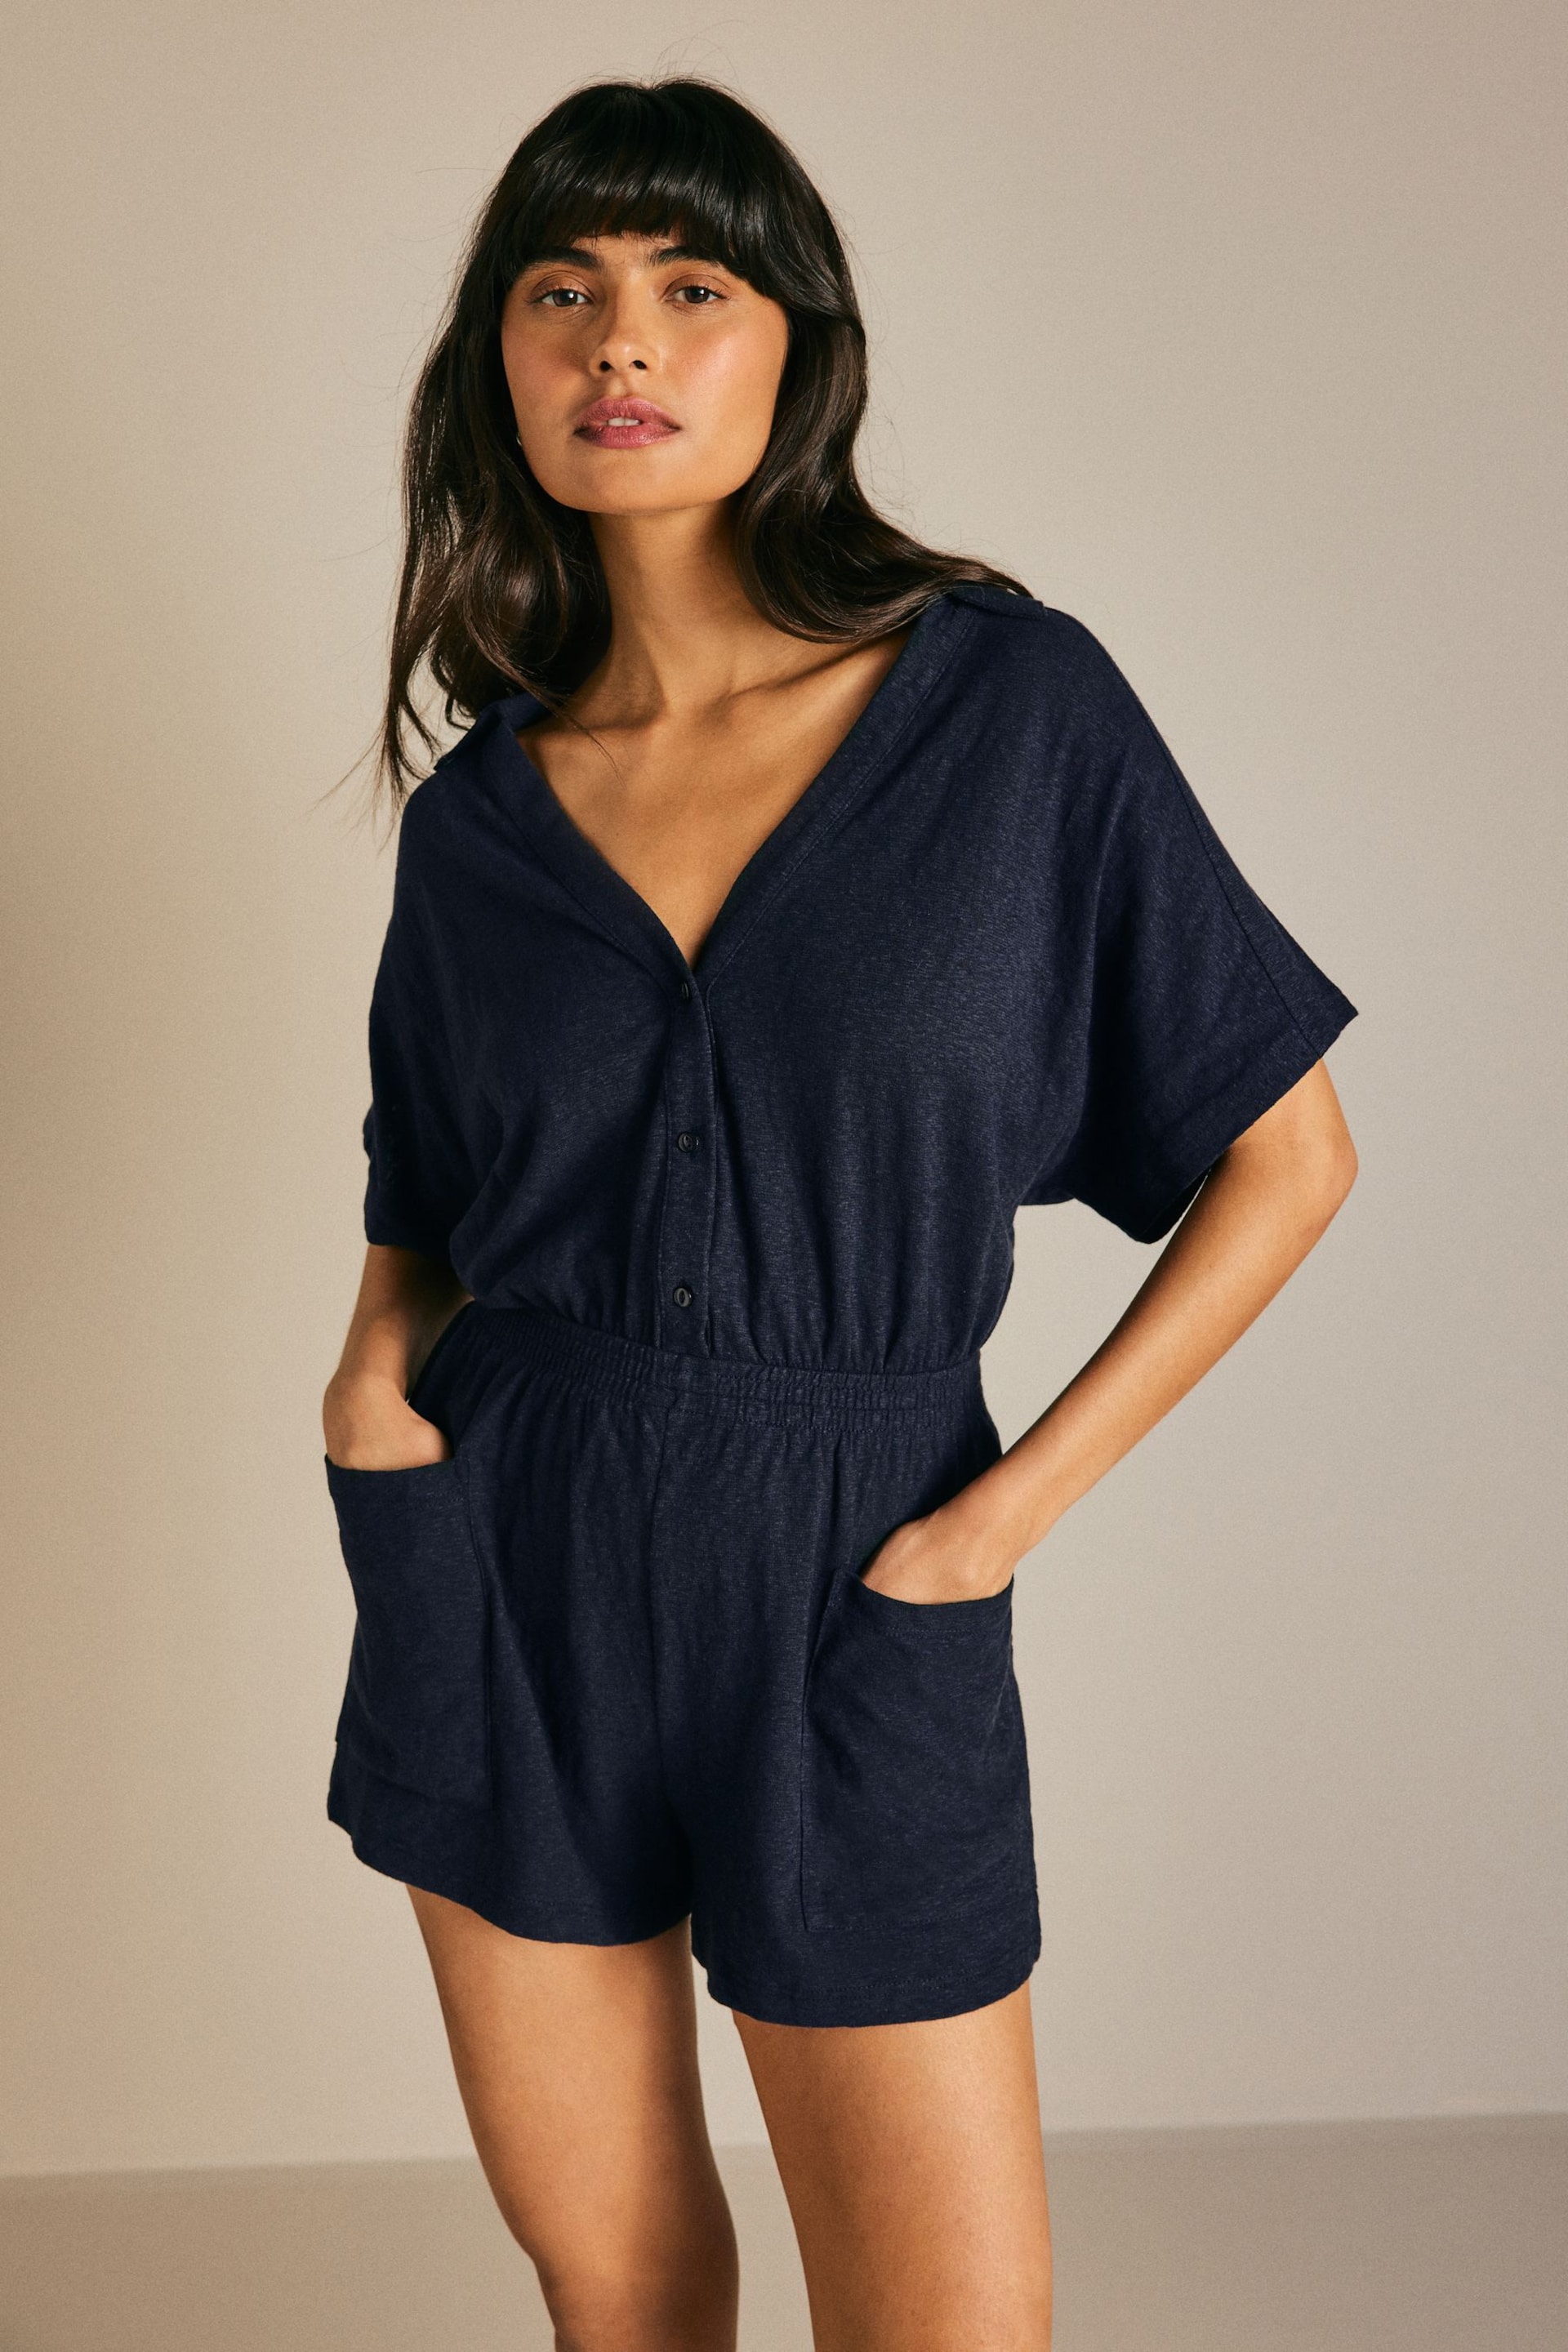 Navy Blue Summer Playsuit - Image 1 of 7